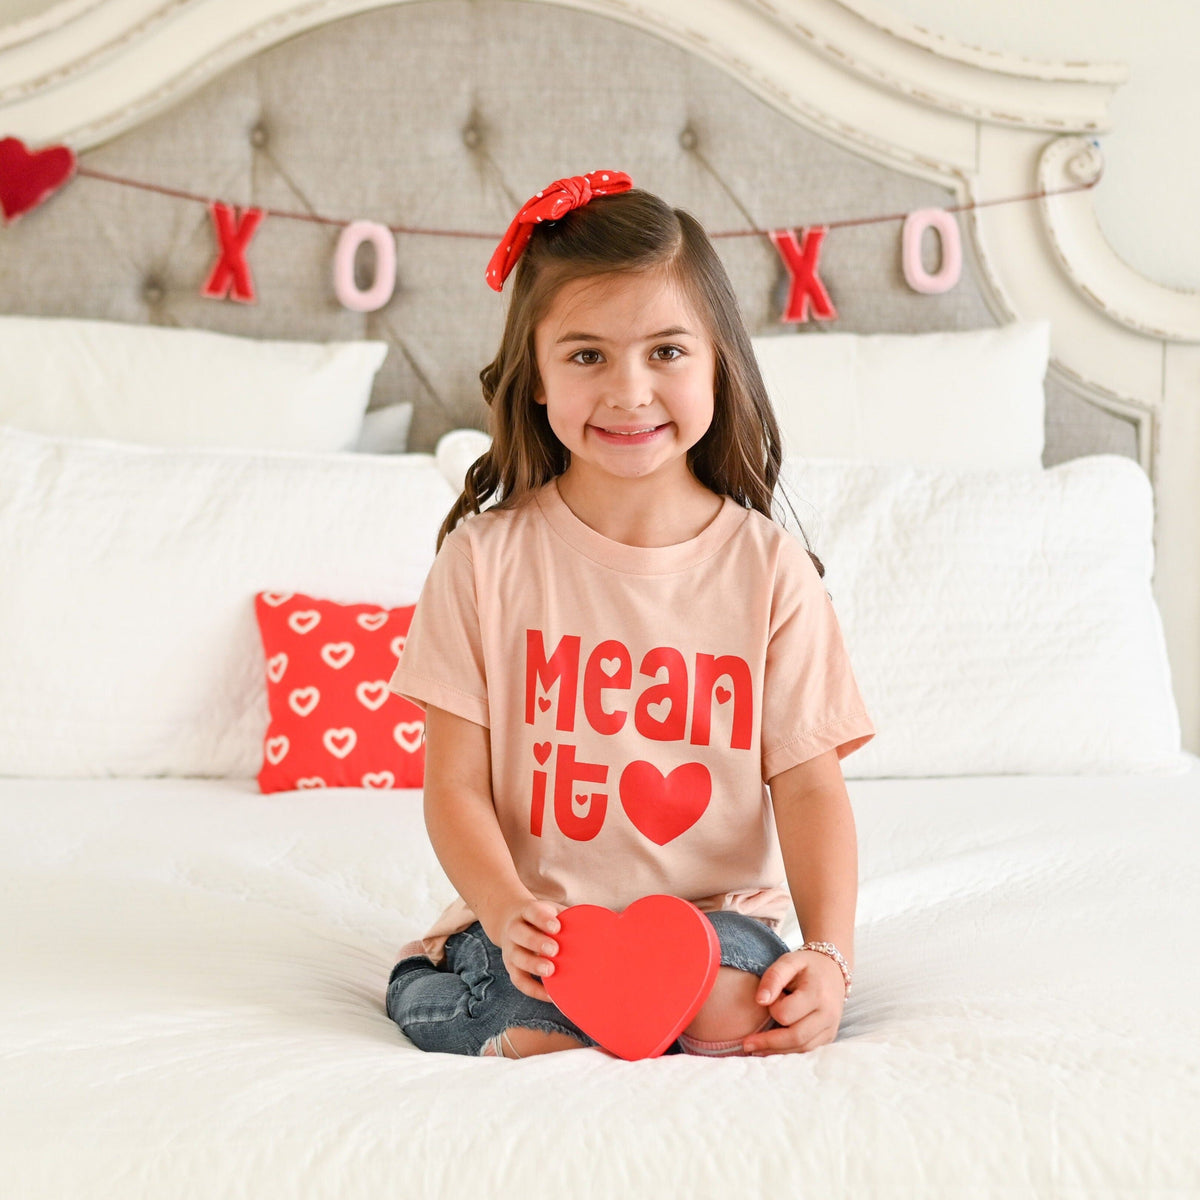 Love You Mean it Shirt